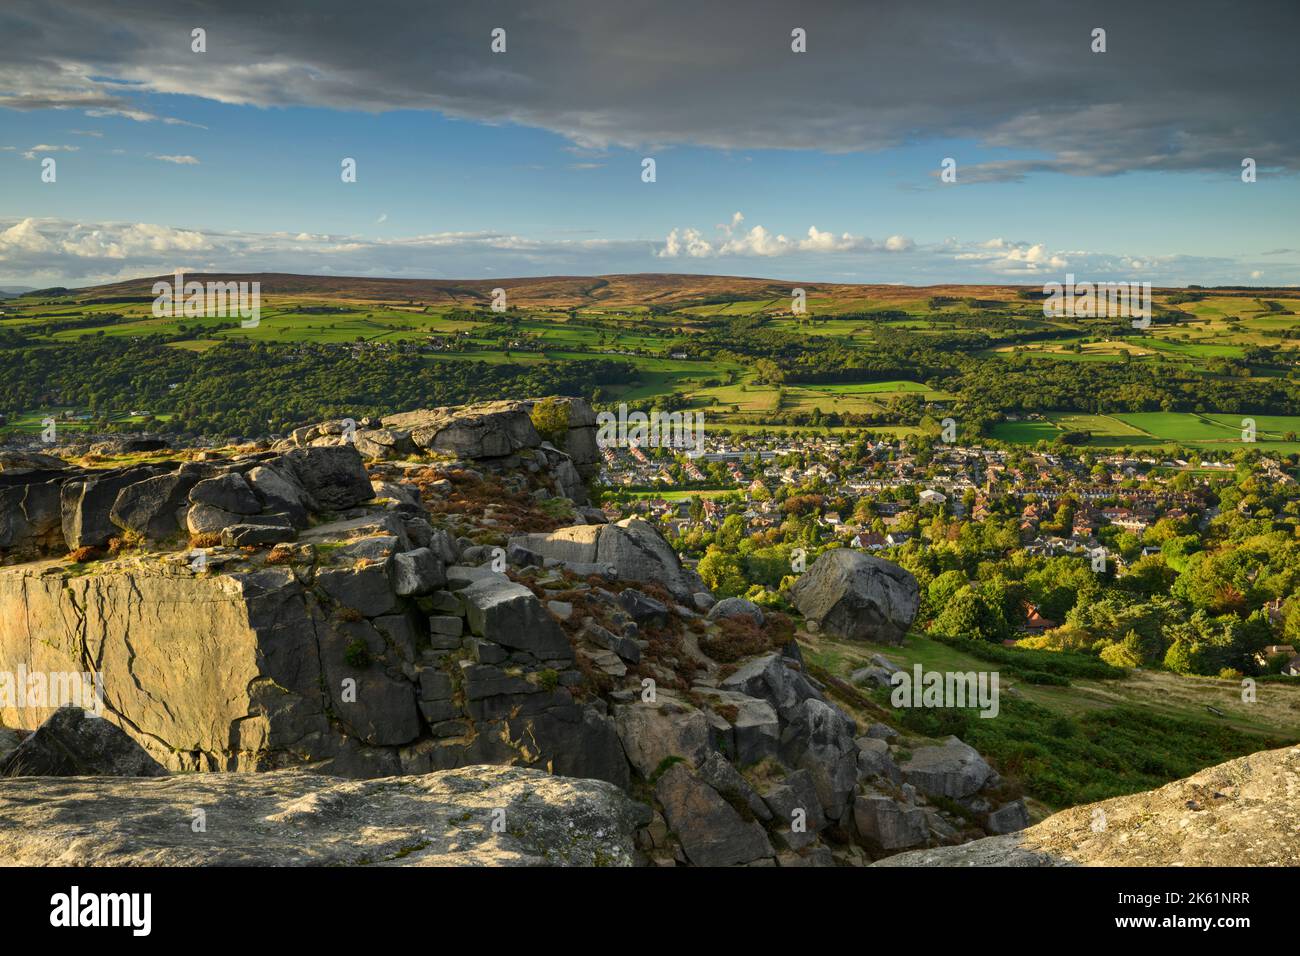 The Cow & Calf Rocks (scenic rural view overlooking village in Wharfe valley, high moorland crag, blue sky) - Ilkley Moor, West Yorkshire, England UK. Stock Photo